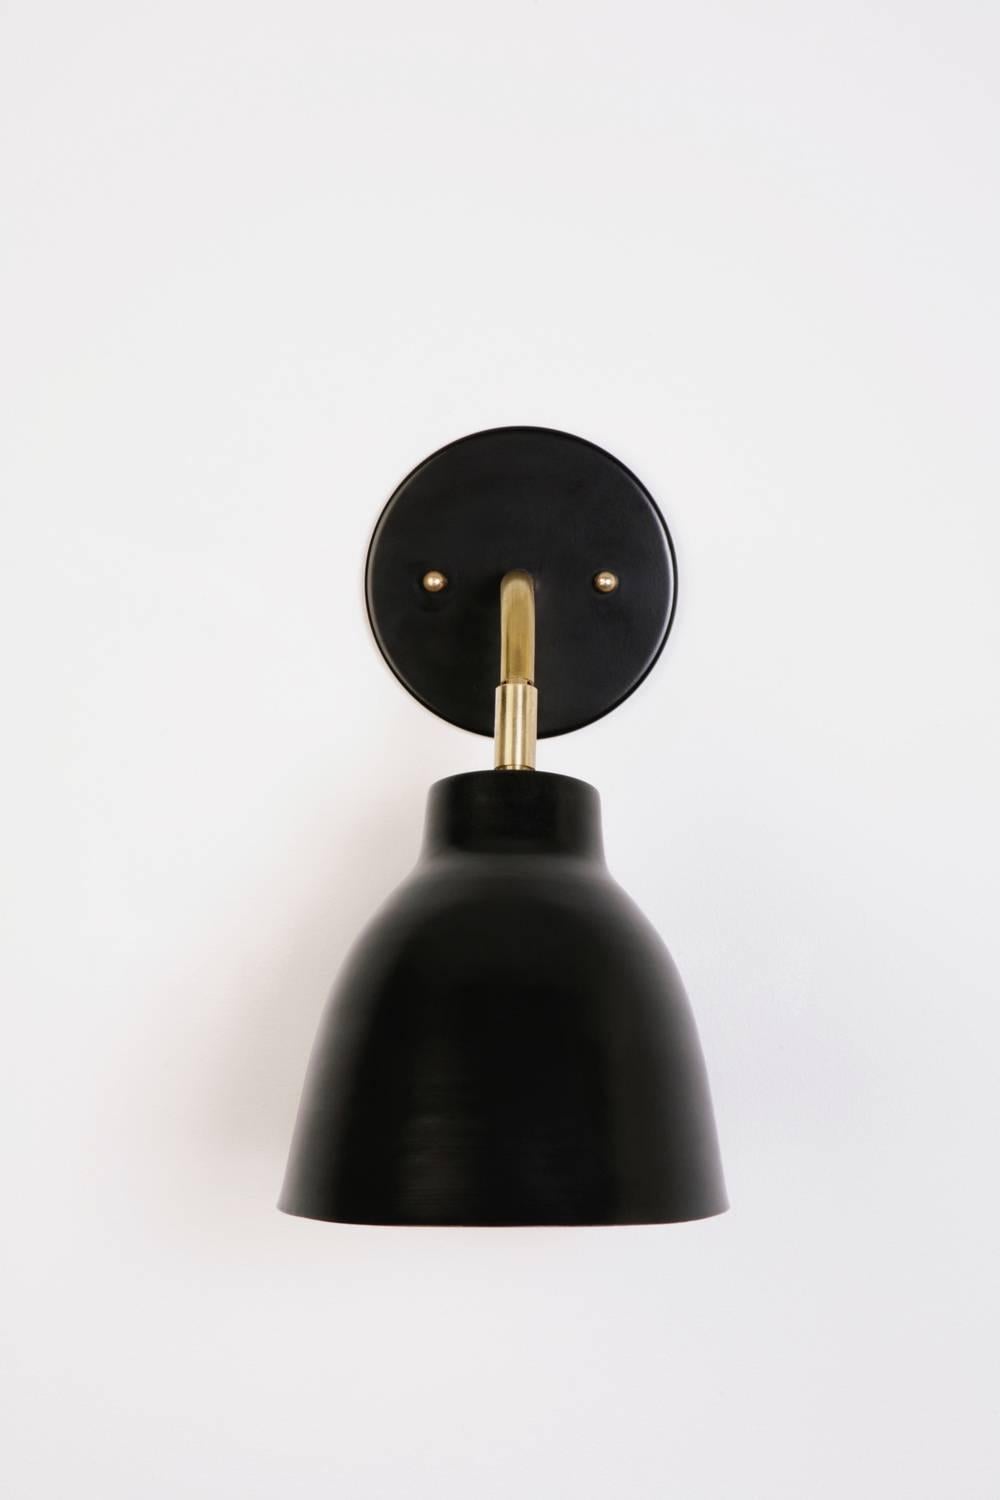 Powder-Coated Navire Petite Sconce With Brass Arm Black Powder Coated Tilting Shade 